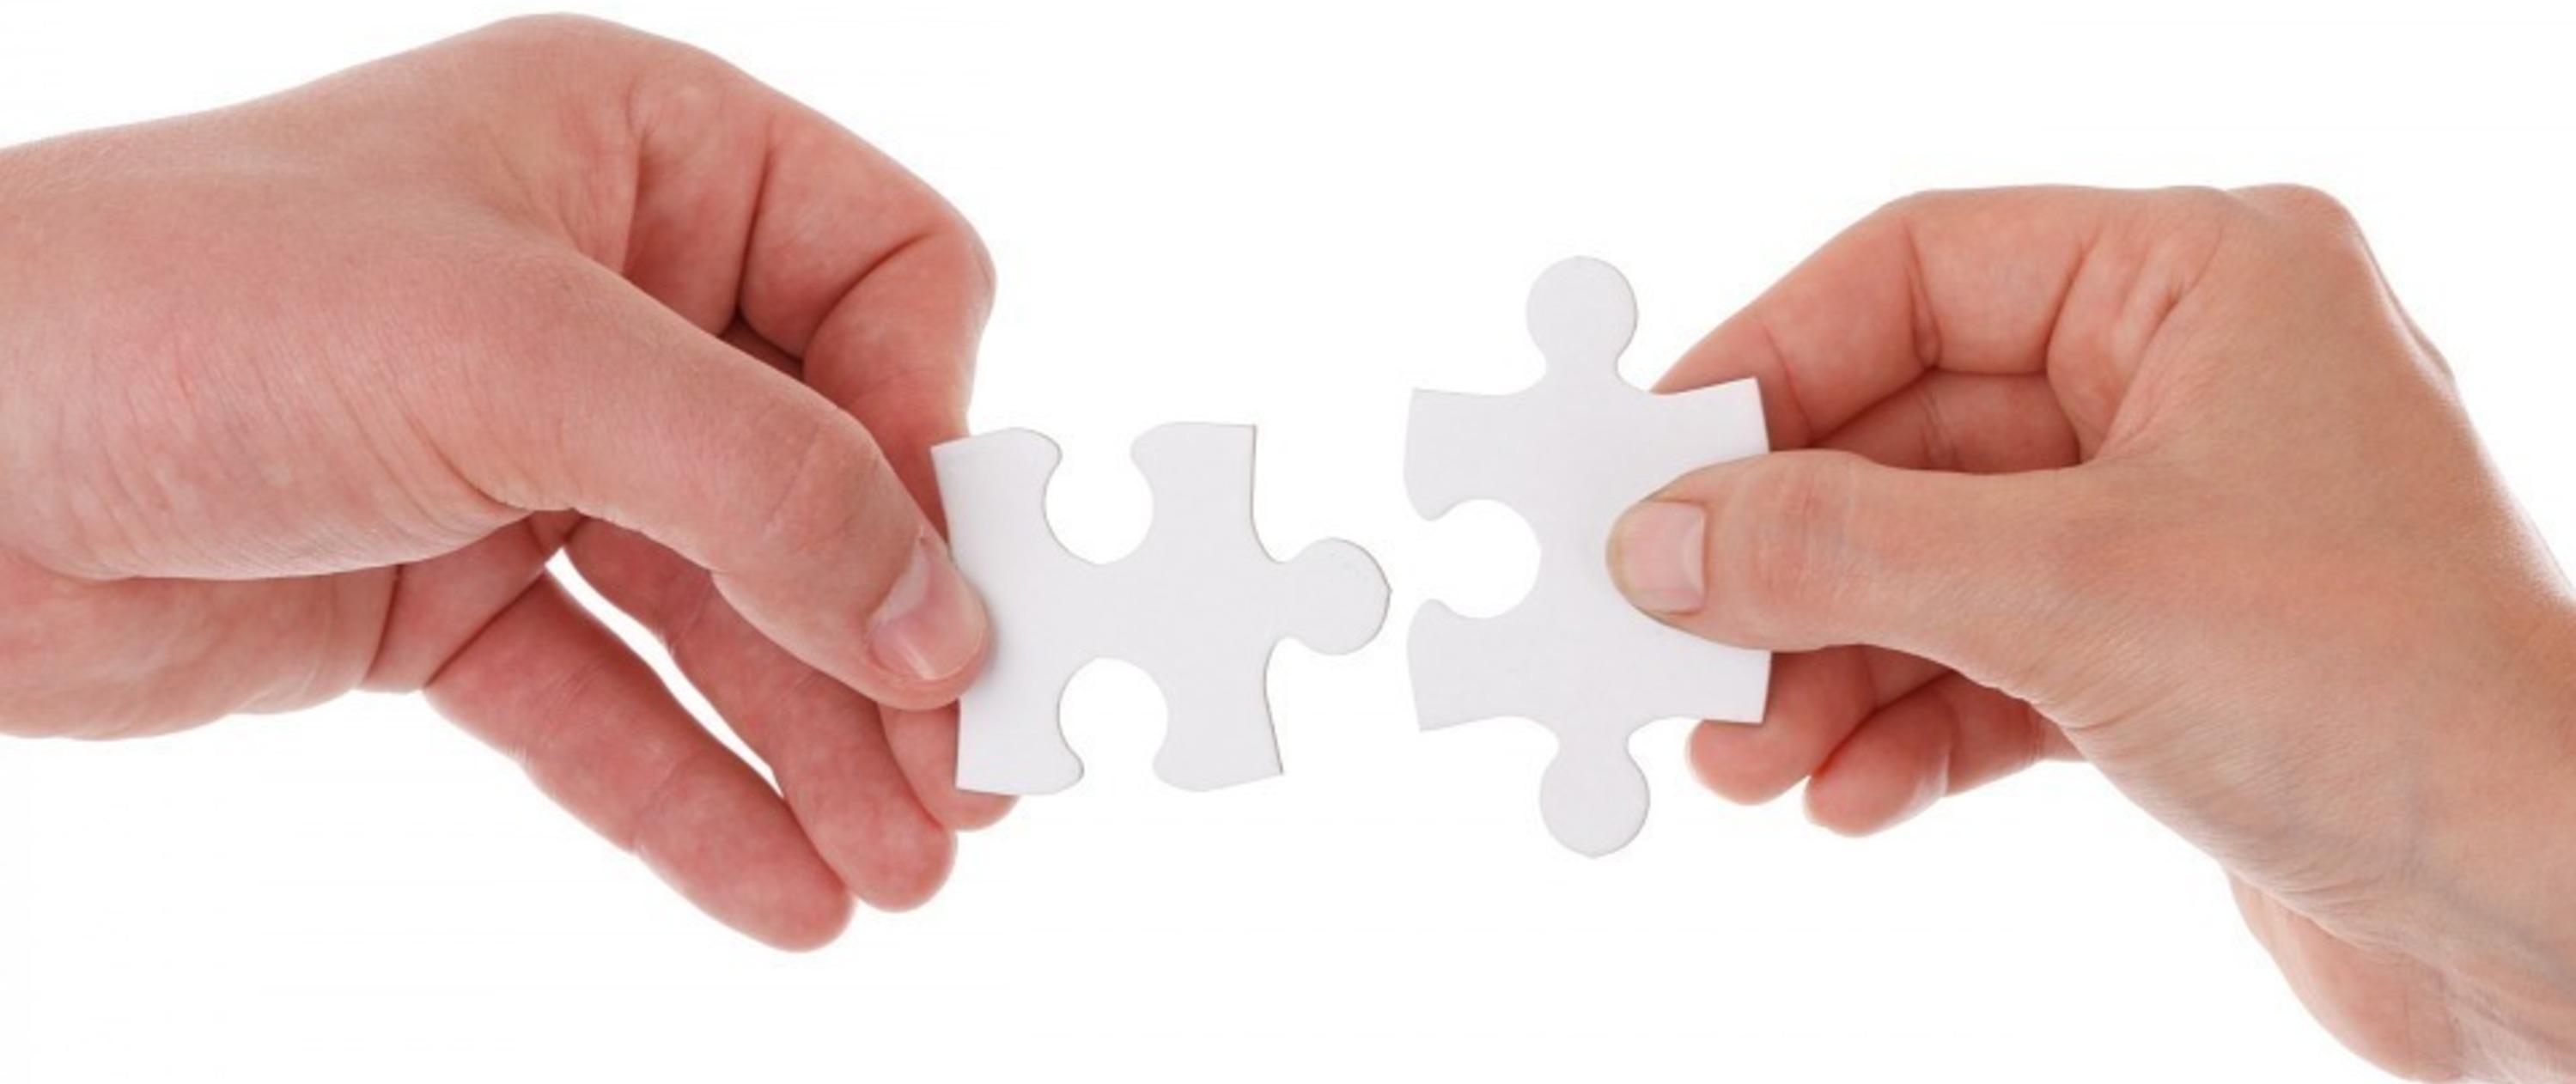 Hand joining a jigsaw puzzle